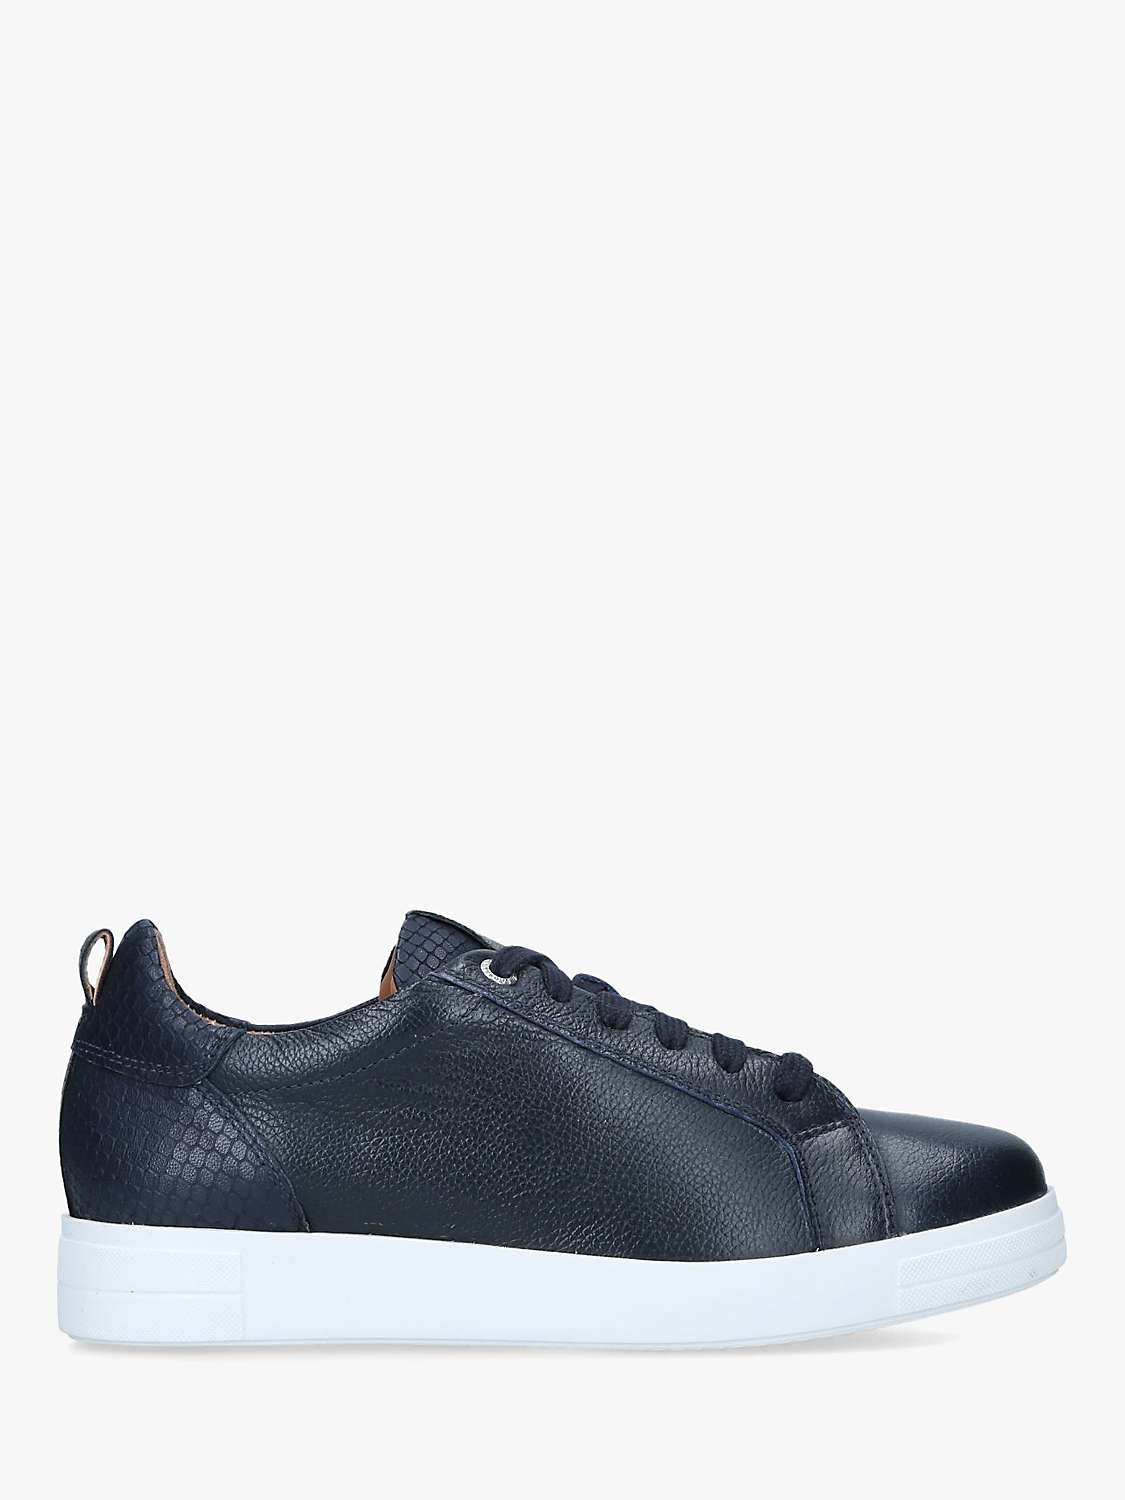 Carvela Comfort Curious Leather Lace Up Trainers, Navy at John Lewis ...